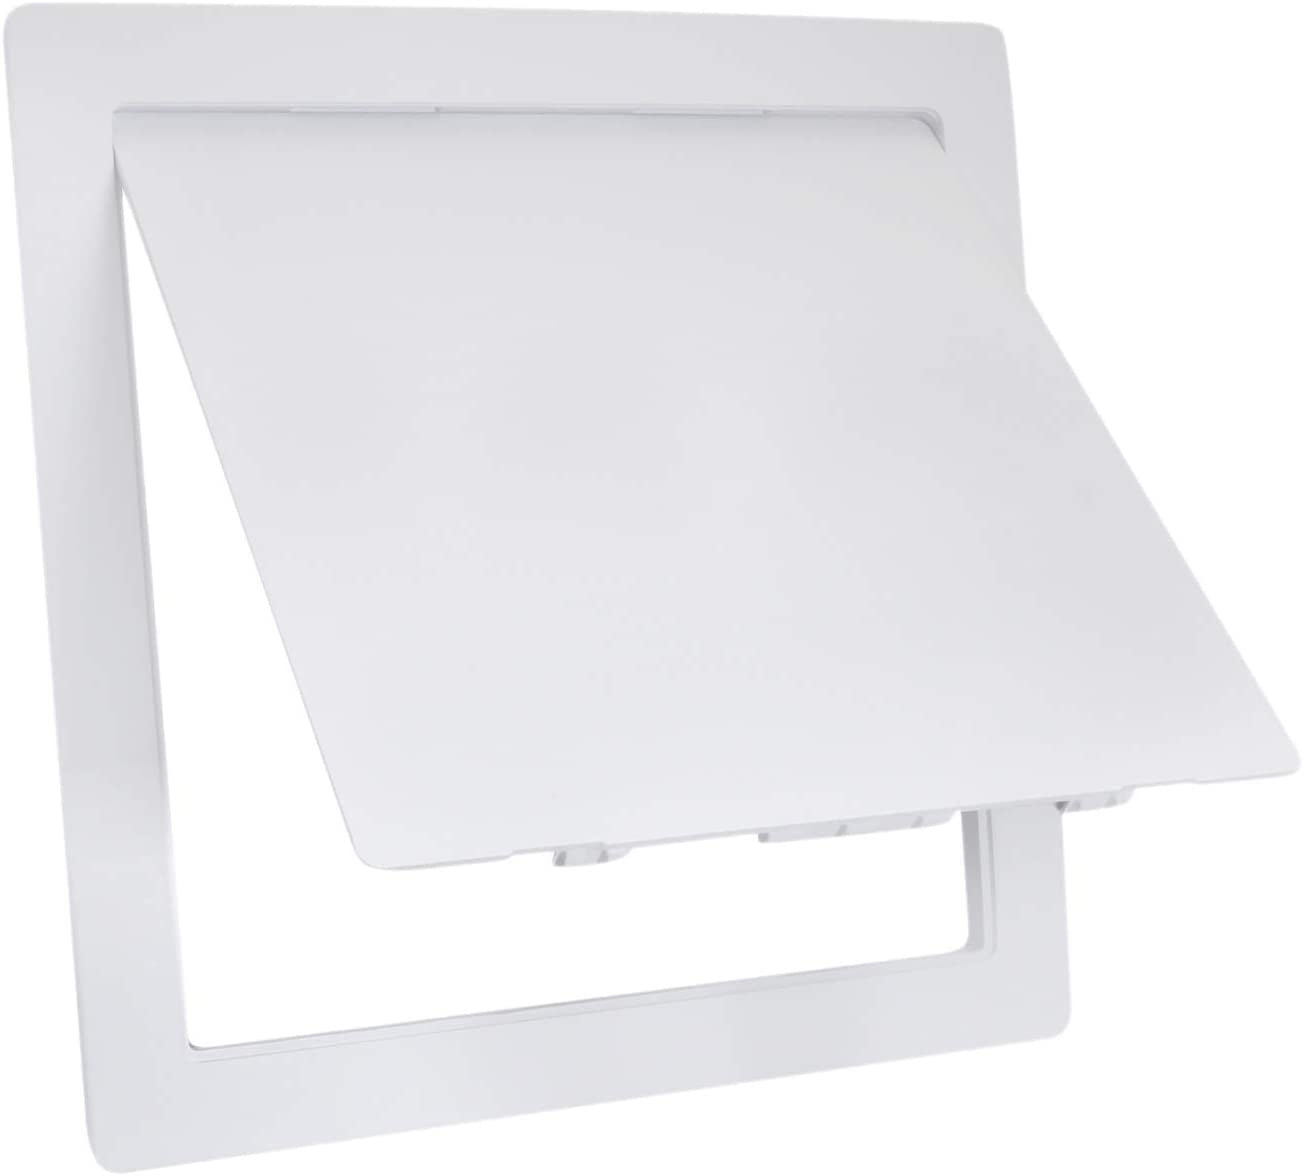 Suteck Plastic Access Panel for Drywall Ceiling 4 x 6 Inch Reinforced Plumbing Wall Access Doors Removable Hinged White 